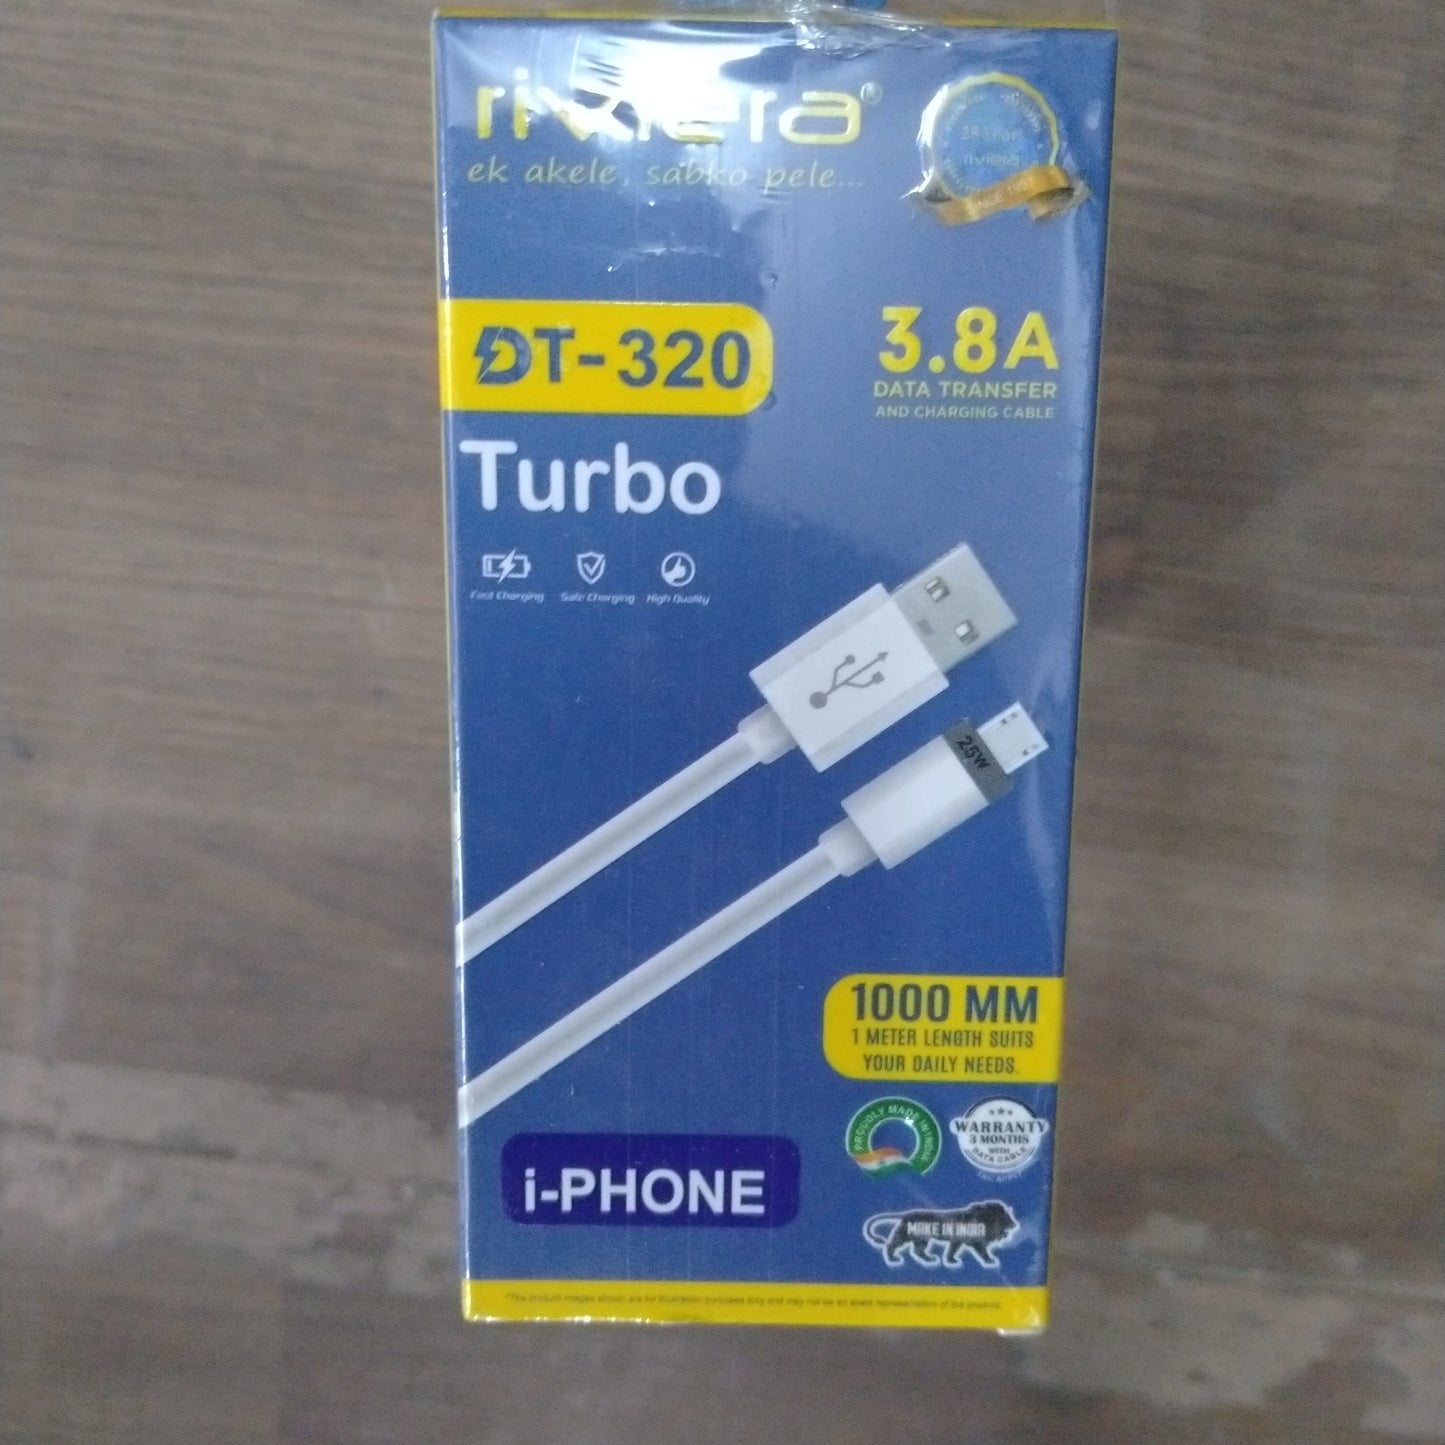 Riviera DT-320 Turbo/Iphone Cable